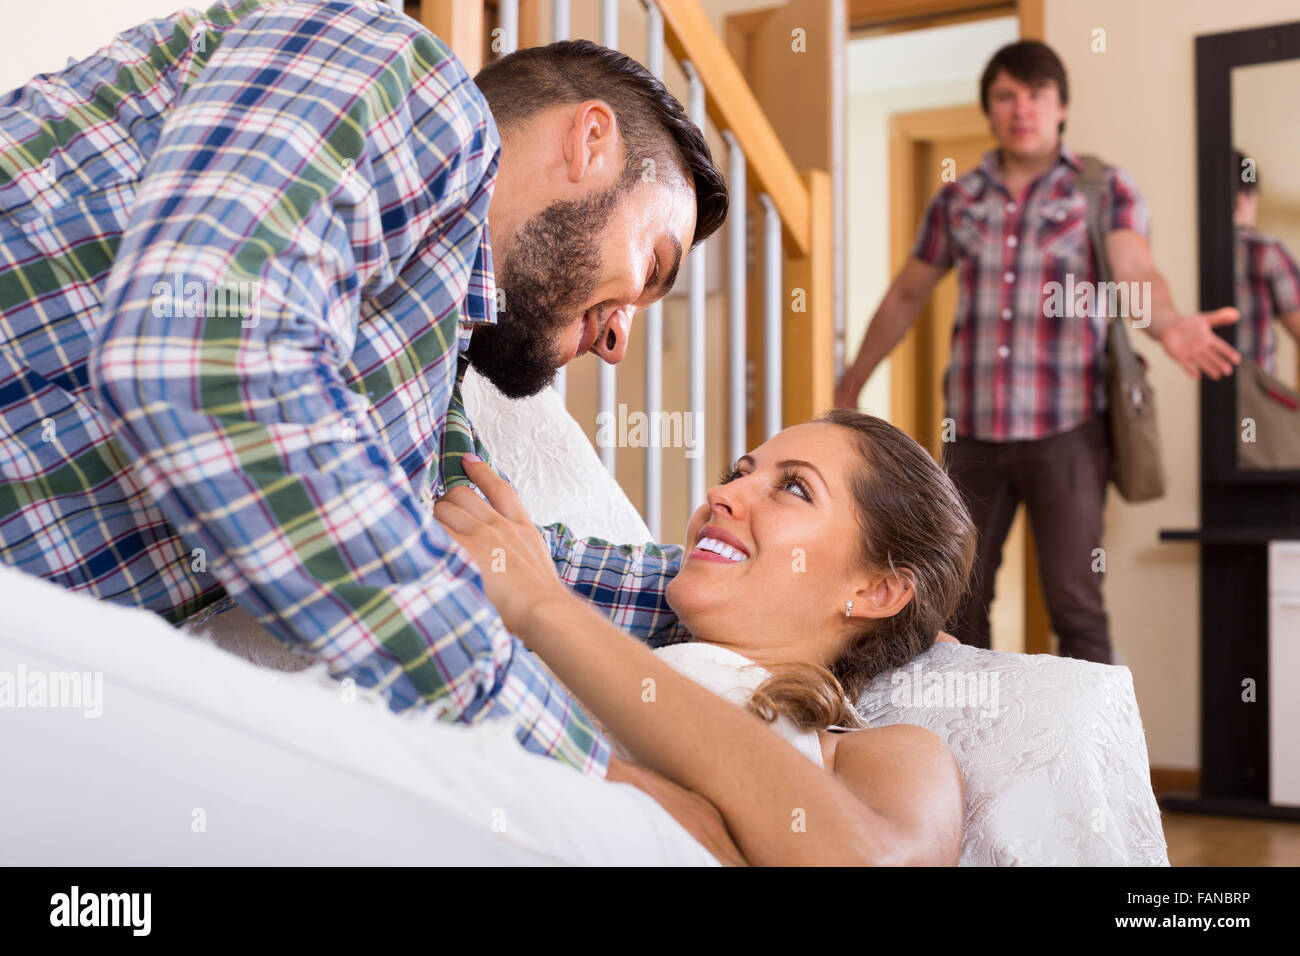 cheating spouse coming home and saw unfaithful woman Stock Photo